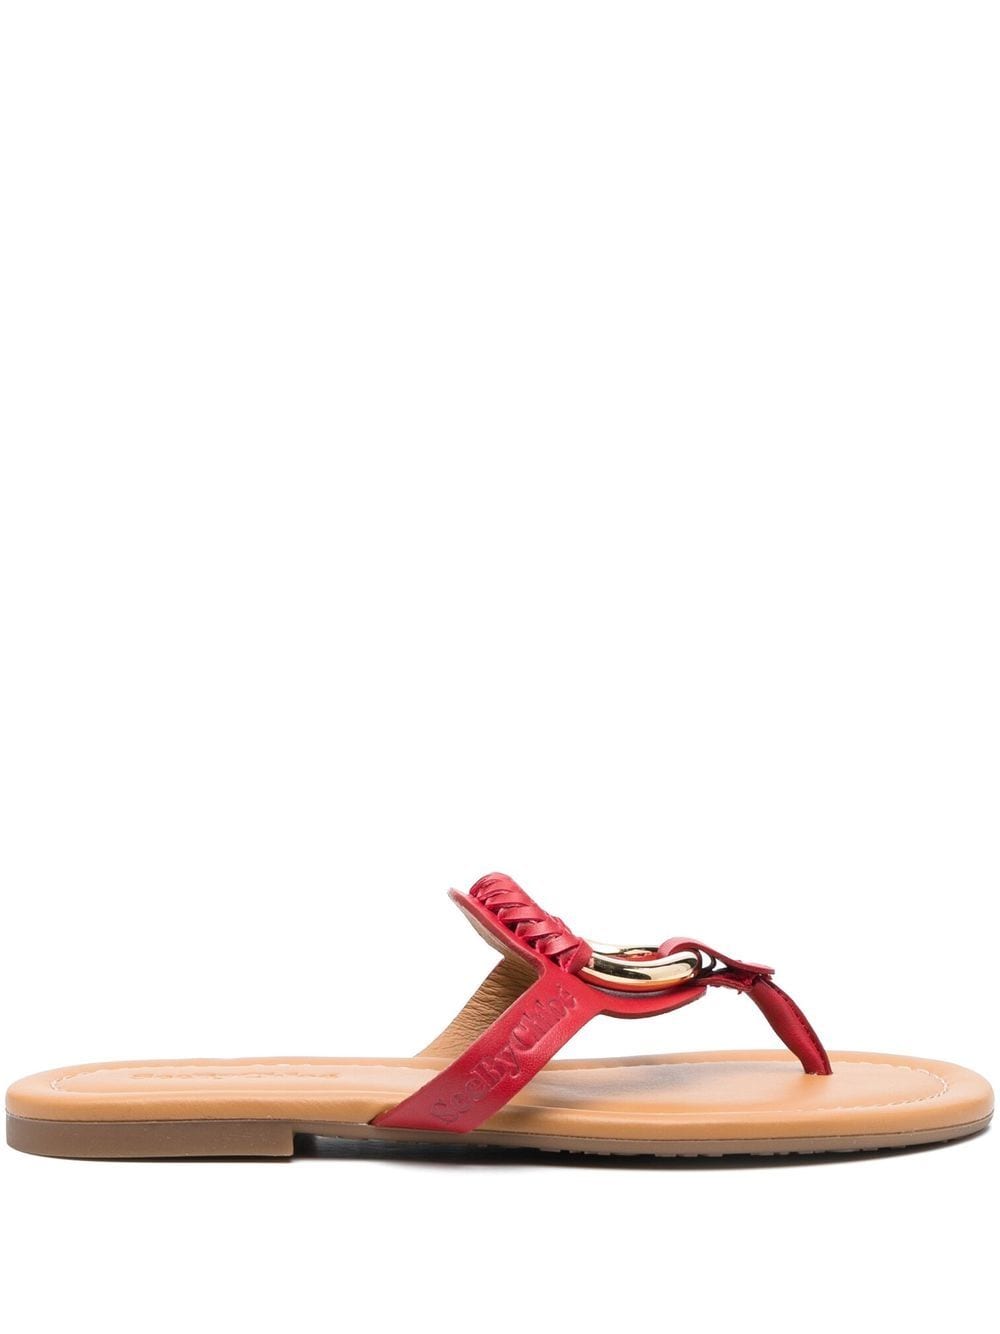 Image 1 of See by Chloé leather thong sandals